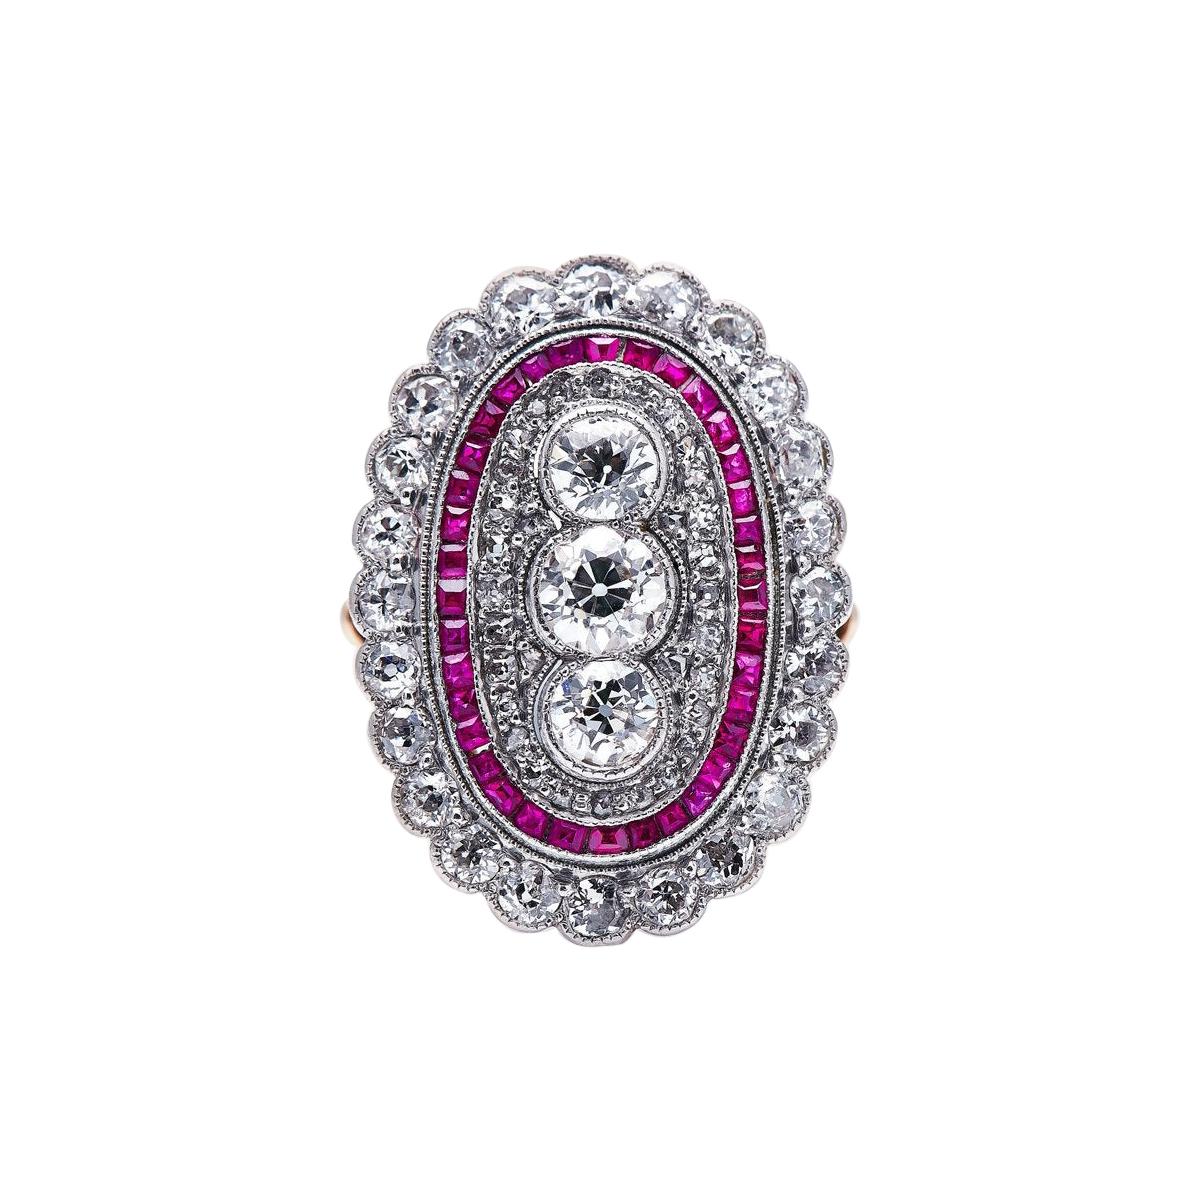 Antique, Edwardian, 18ct Gold and Platinum, Ruby and Diamond Ring